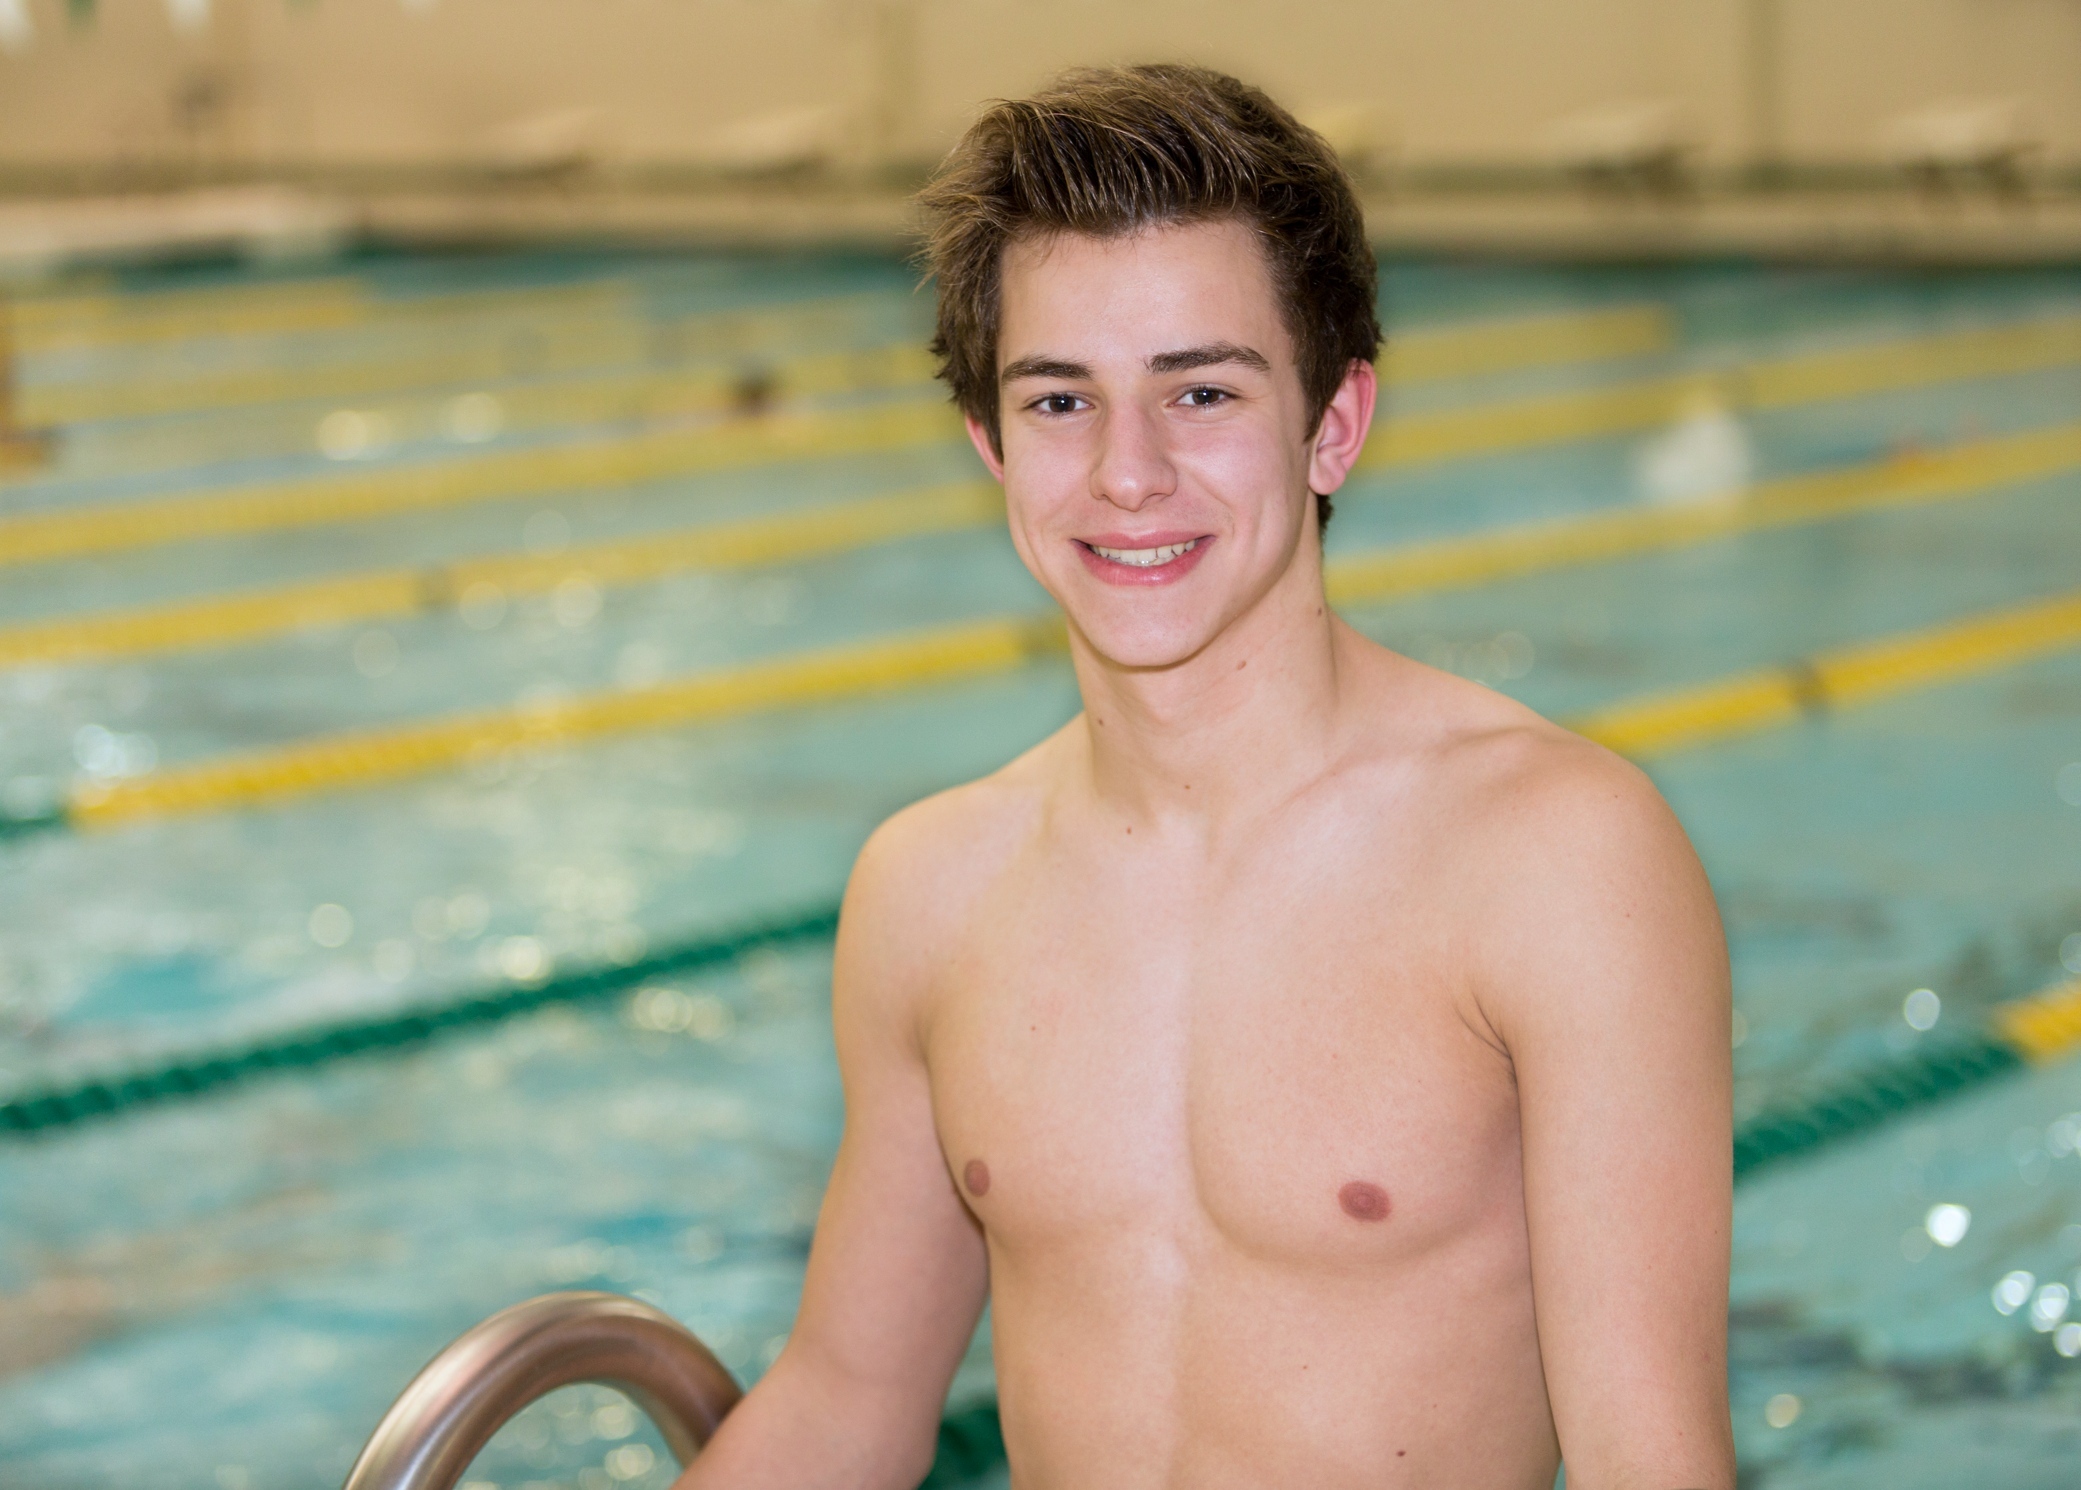 twink tube swimming team players - 610d25760dfc2.jpg 